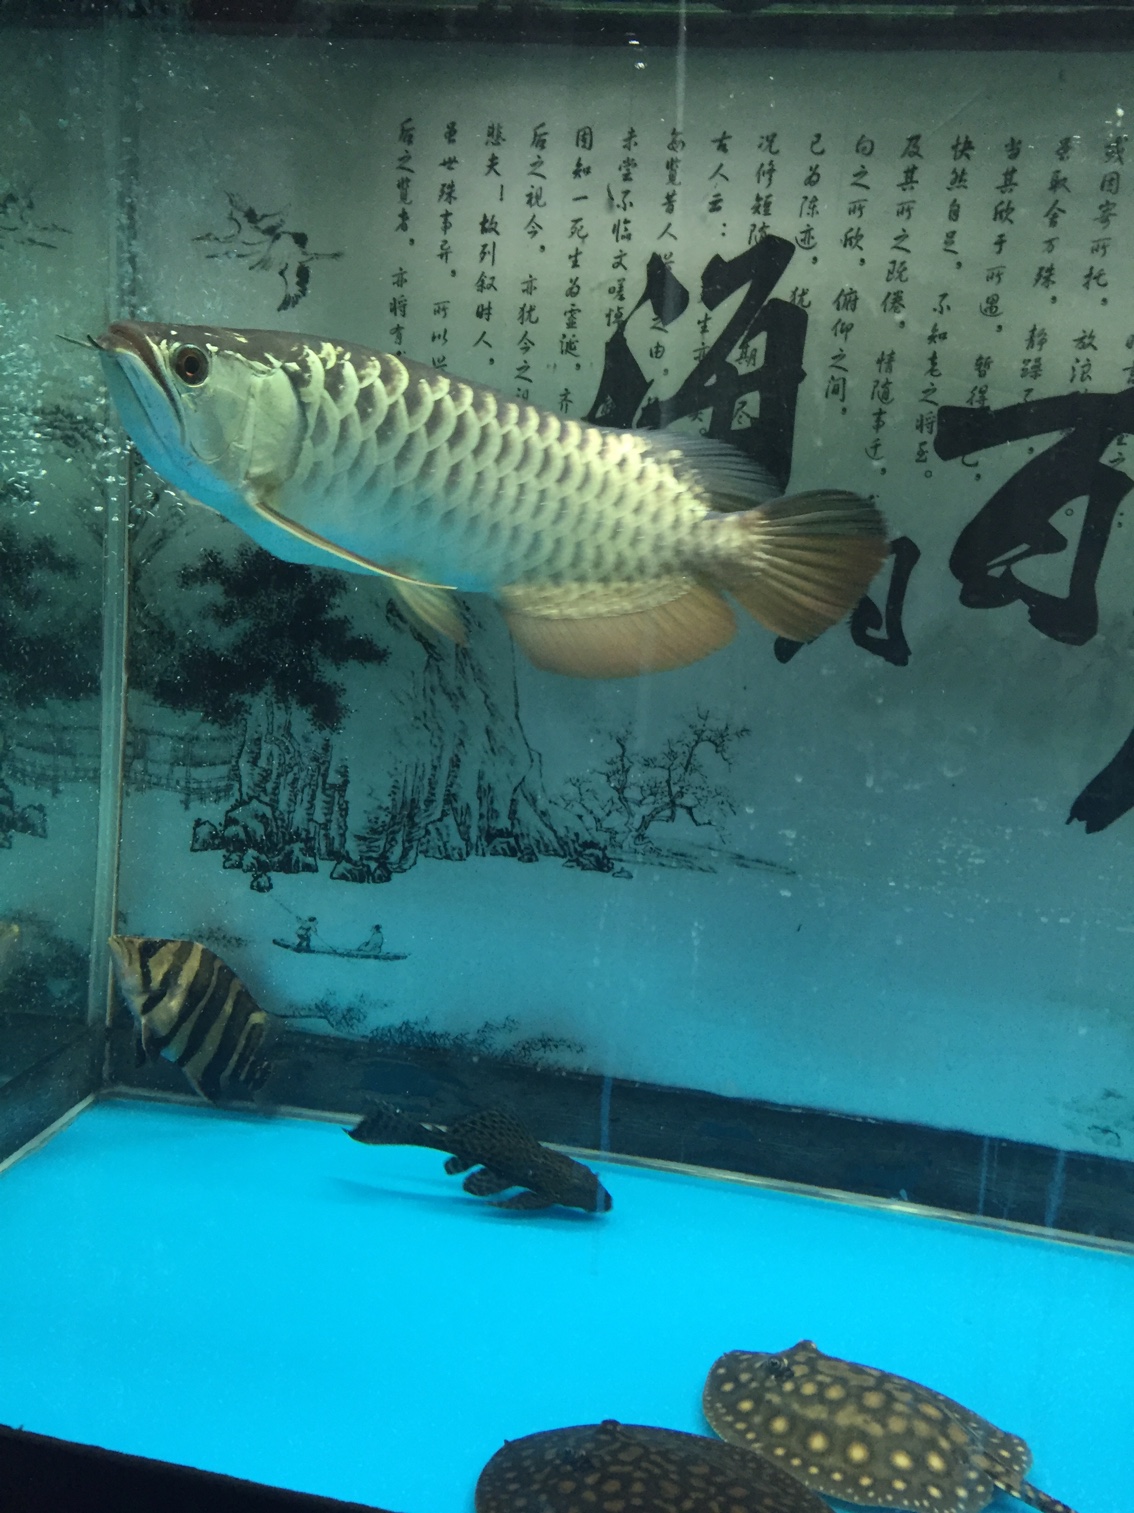 Sunbathing fish by the way help me see what stingray Stingray ASIAN AROWANA,AROWANA,STINGRAY The9sheet